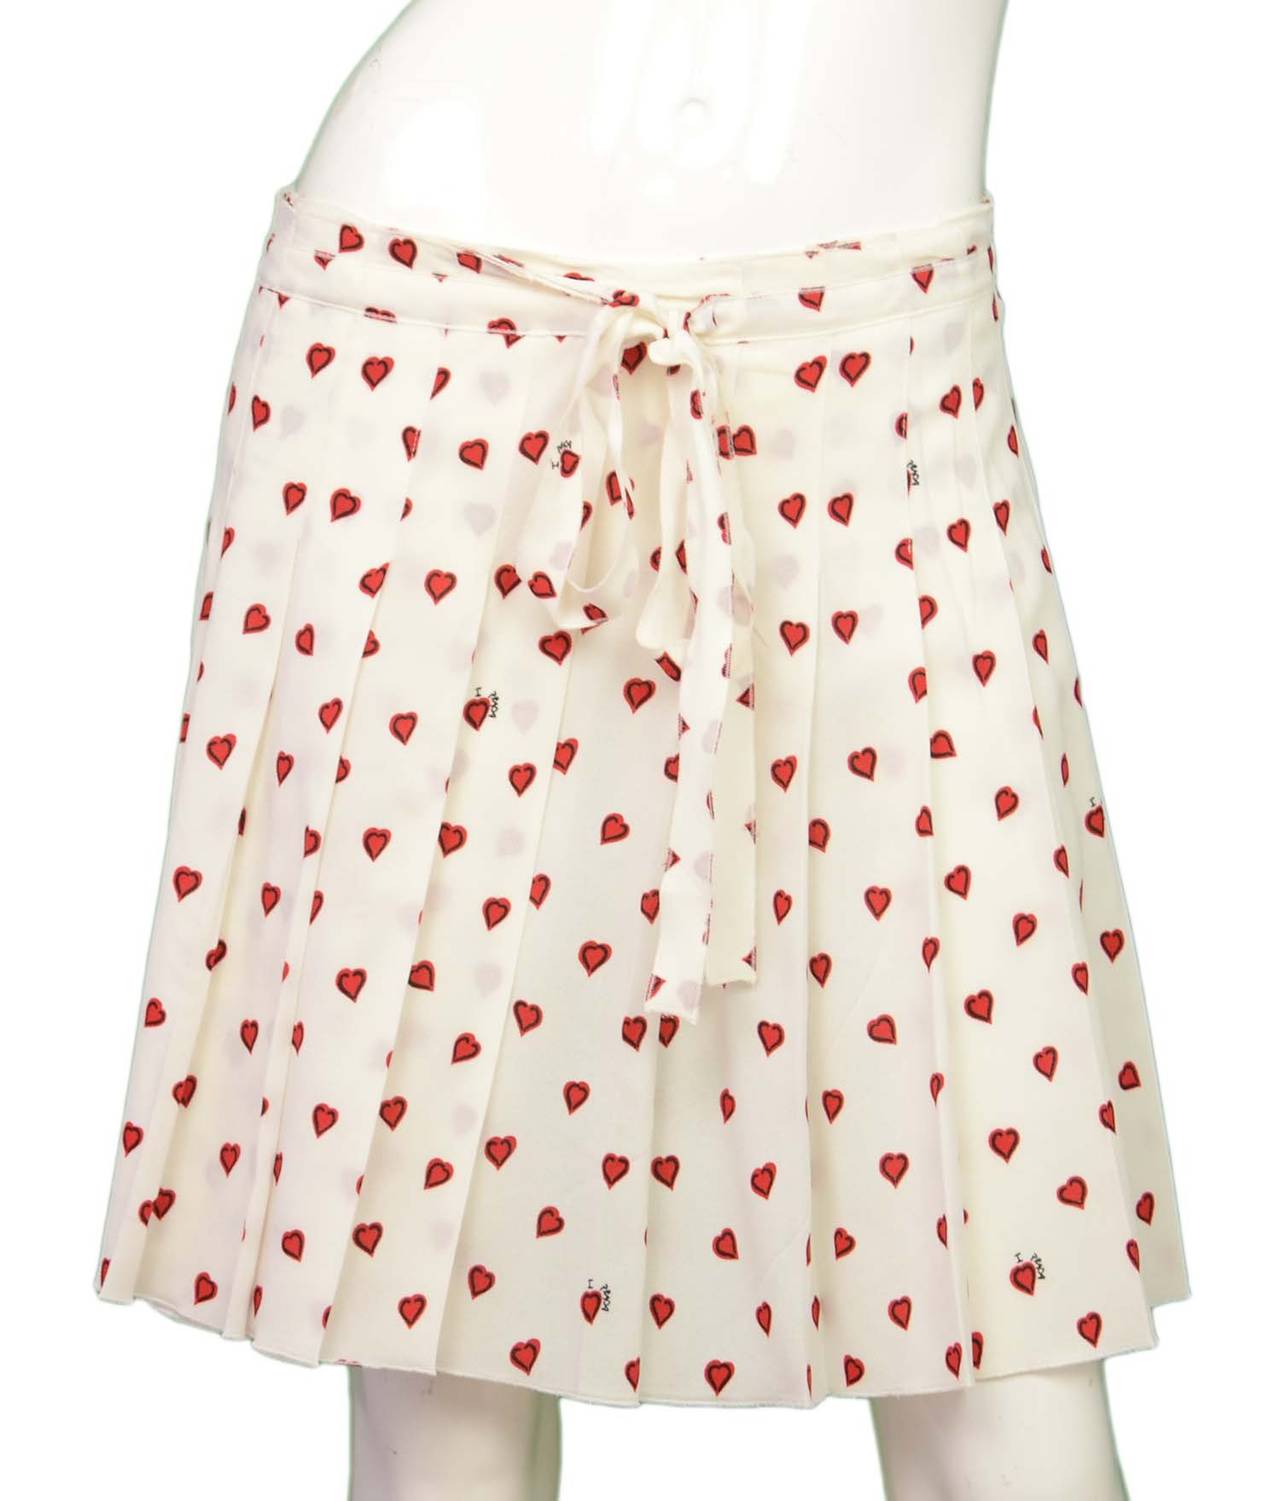 Prada Silk Pleated Skirt w/Heart Print
Features 'I (heart symbol) Prada' text throughout print on skirt

    Made in: Italy
    Color: White red and black
    Composition: 98% viscose, 2% other fibers
    Lining: None
    Closure/opening: